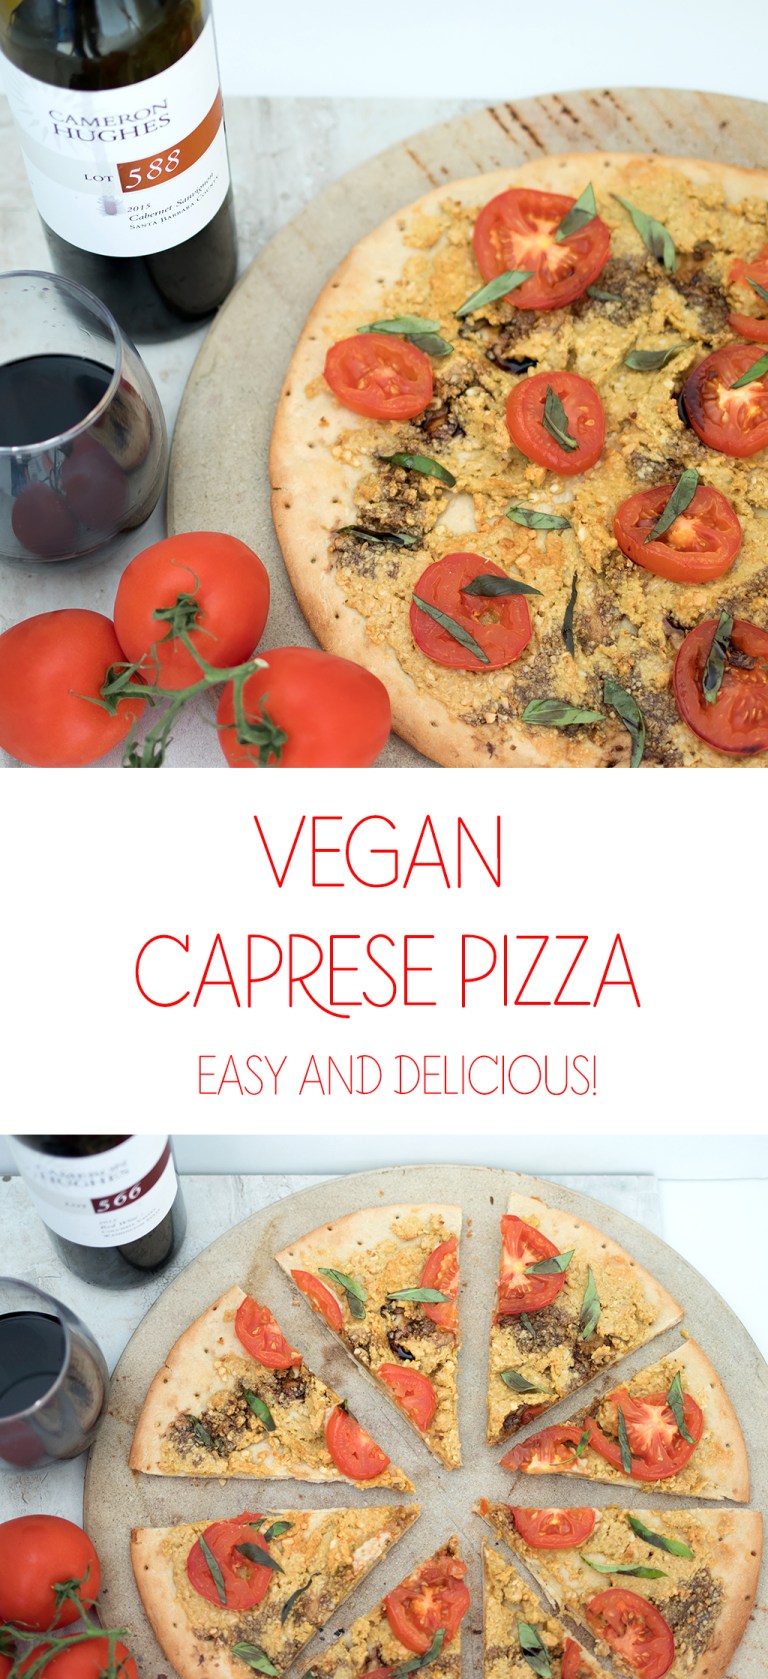 Vegan caprese pizza paired with fresh tomatoes and Cameron Hughes wine. Easy and delicious!